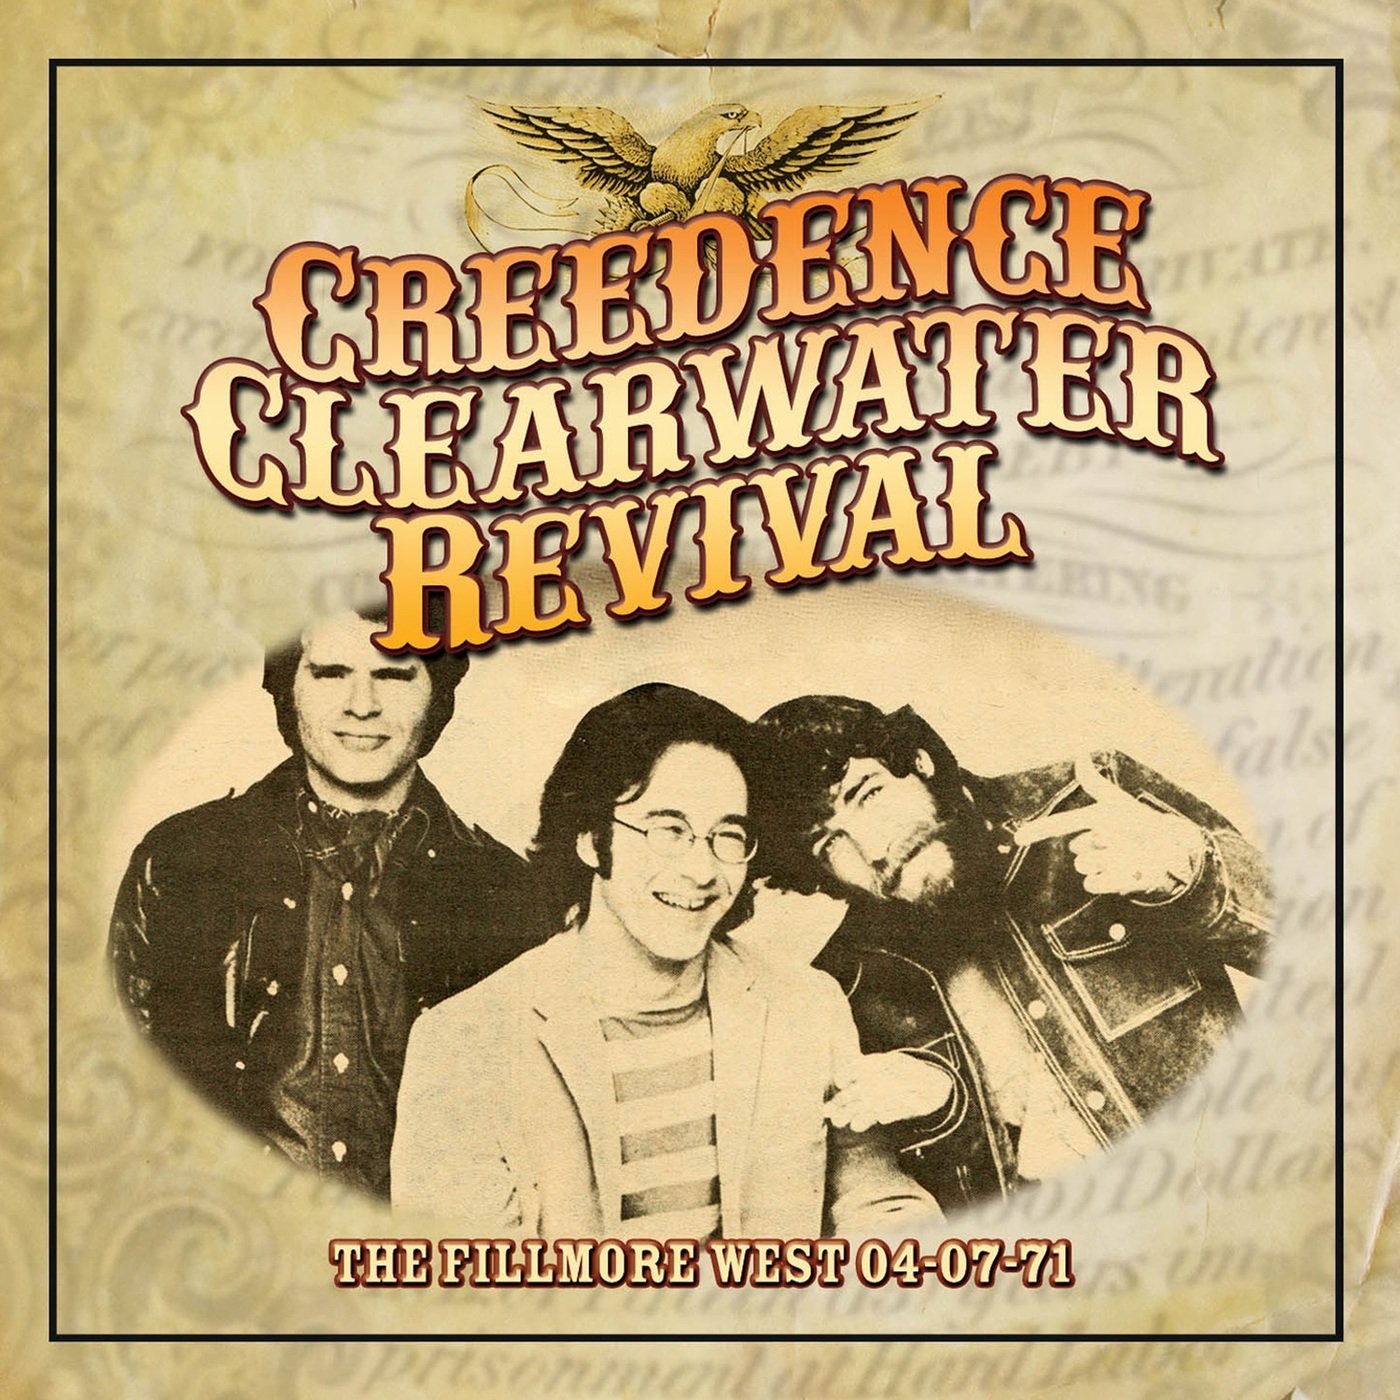 The Fillmore West 04-07-71. Live FM Radio Broadcast Concert (Remastered) —  Creedence Clearwater Revival | Last.fm